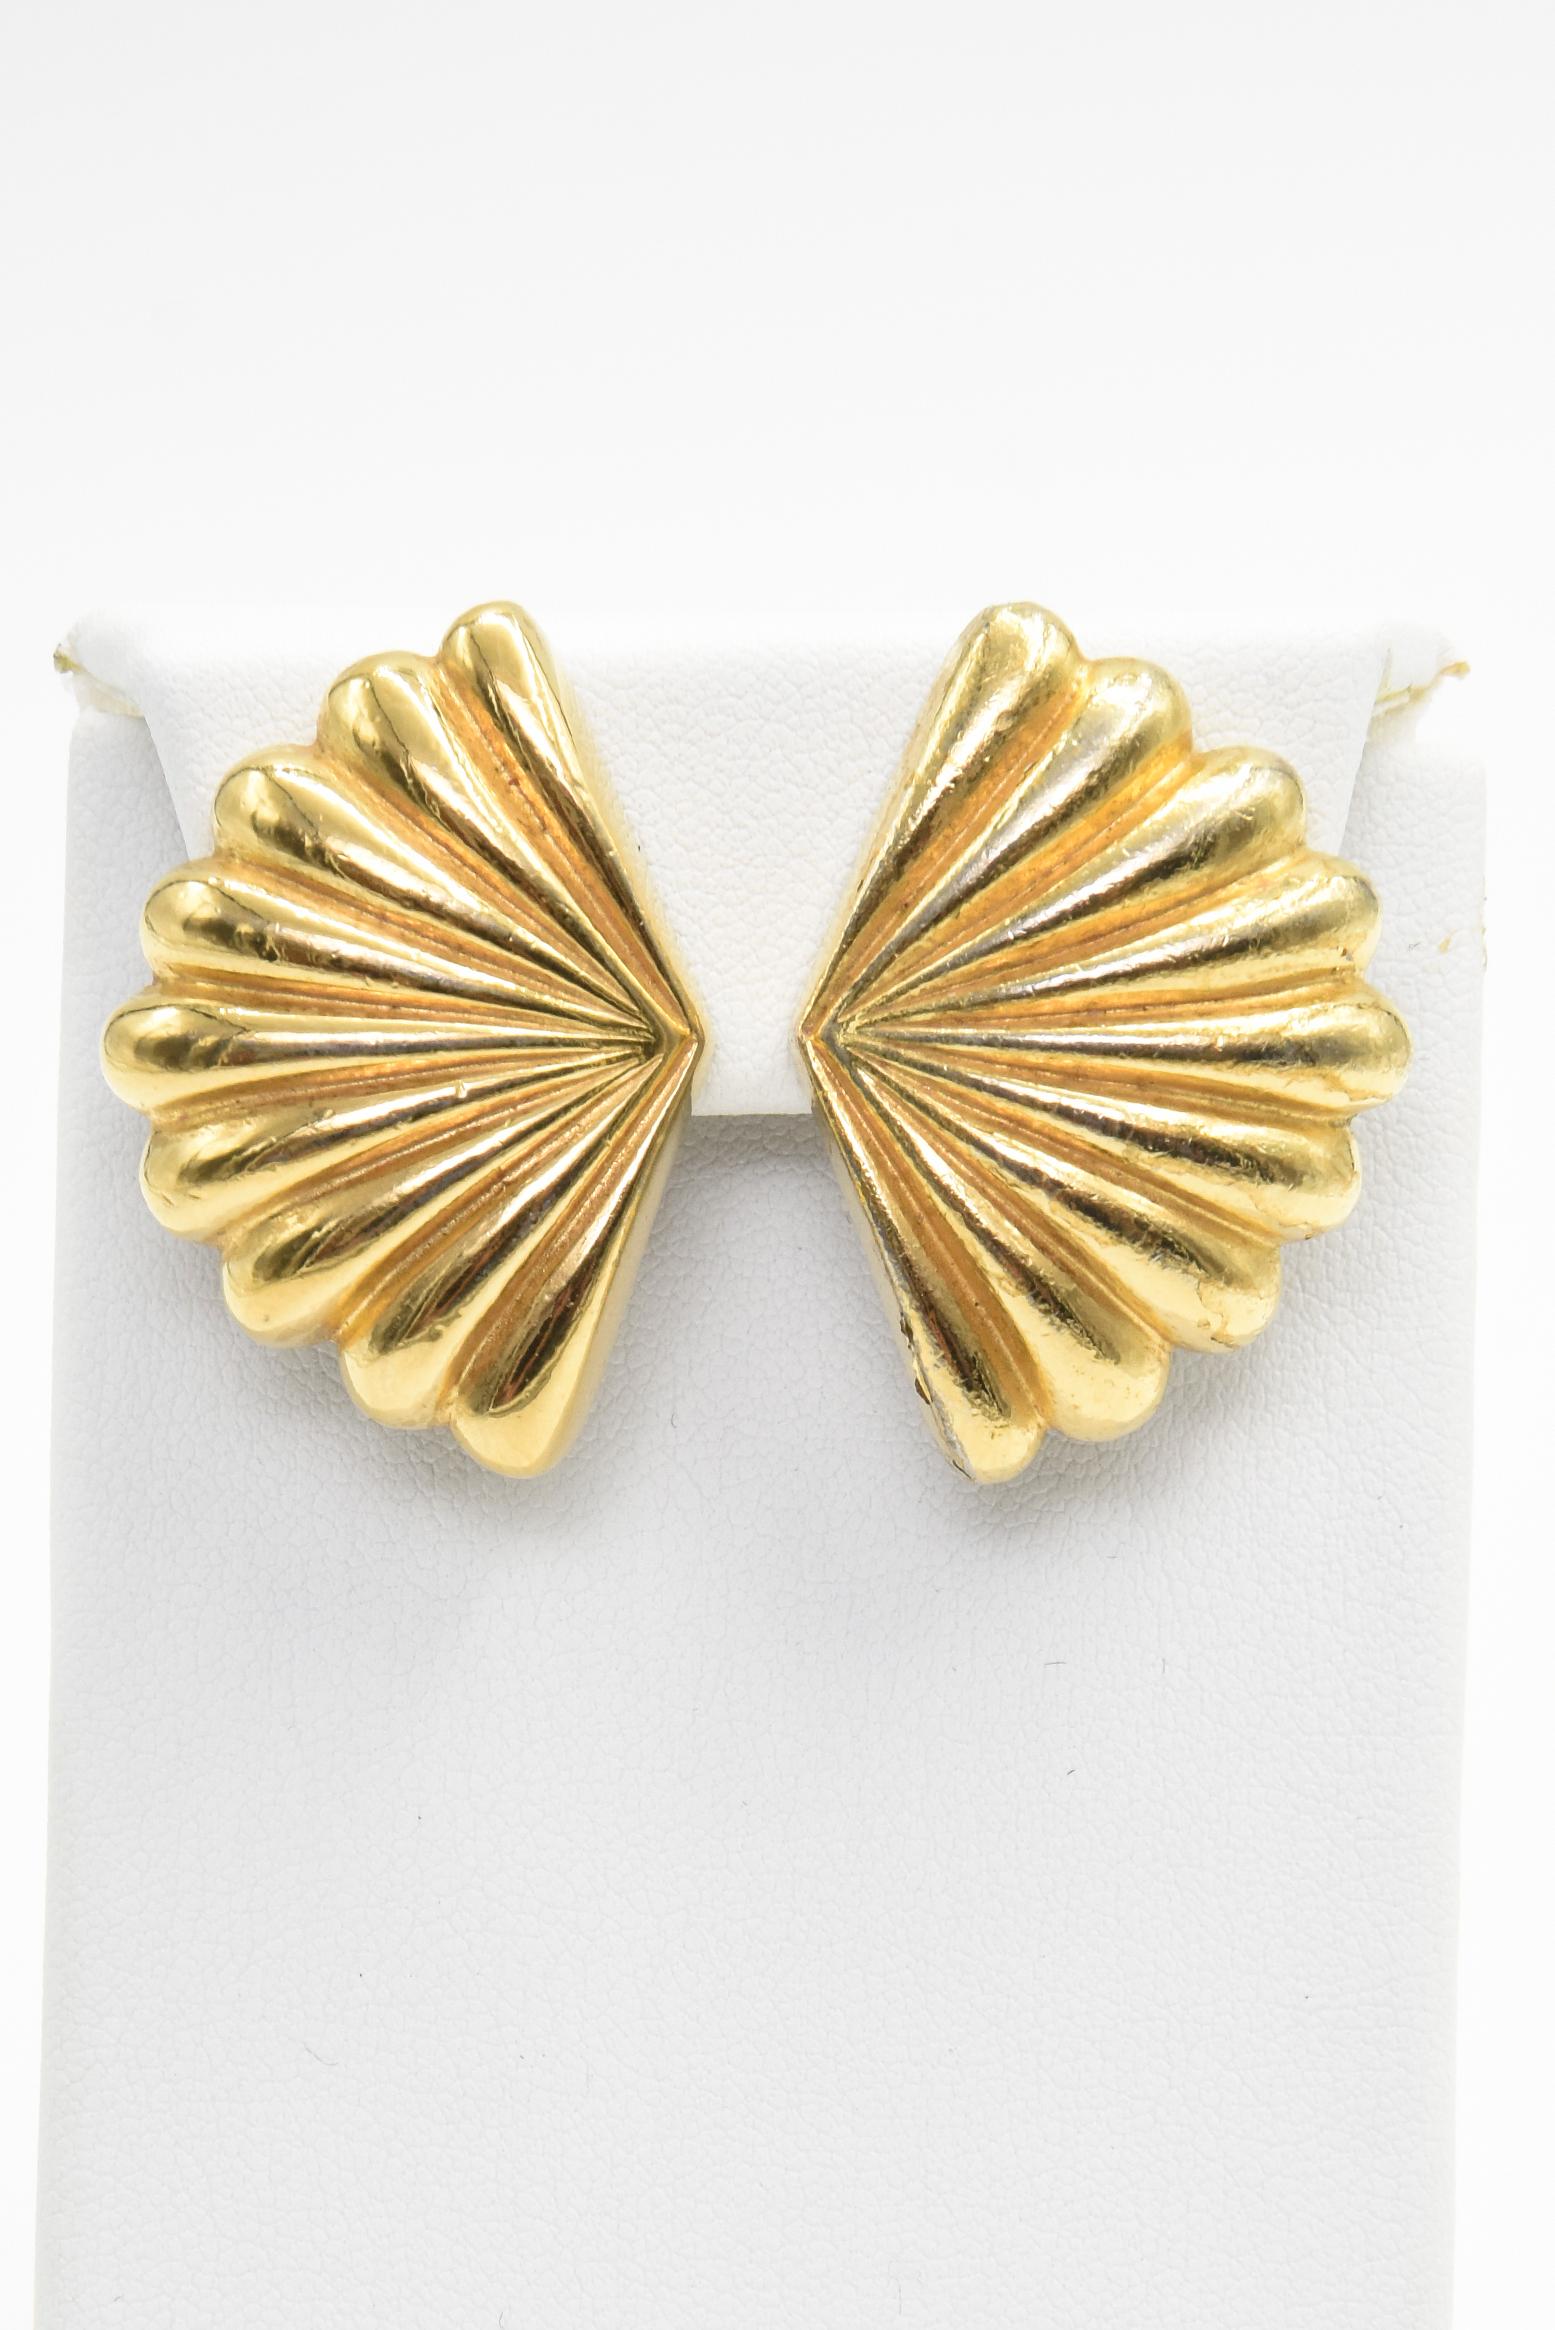 Stunning vintage clip on earrings by Christian Dior are gold-tone in the shape of a fan or shell. 
Clip on back so your ears don't need to be pierced.
Marked Chris. Dior 
